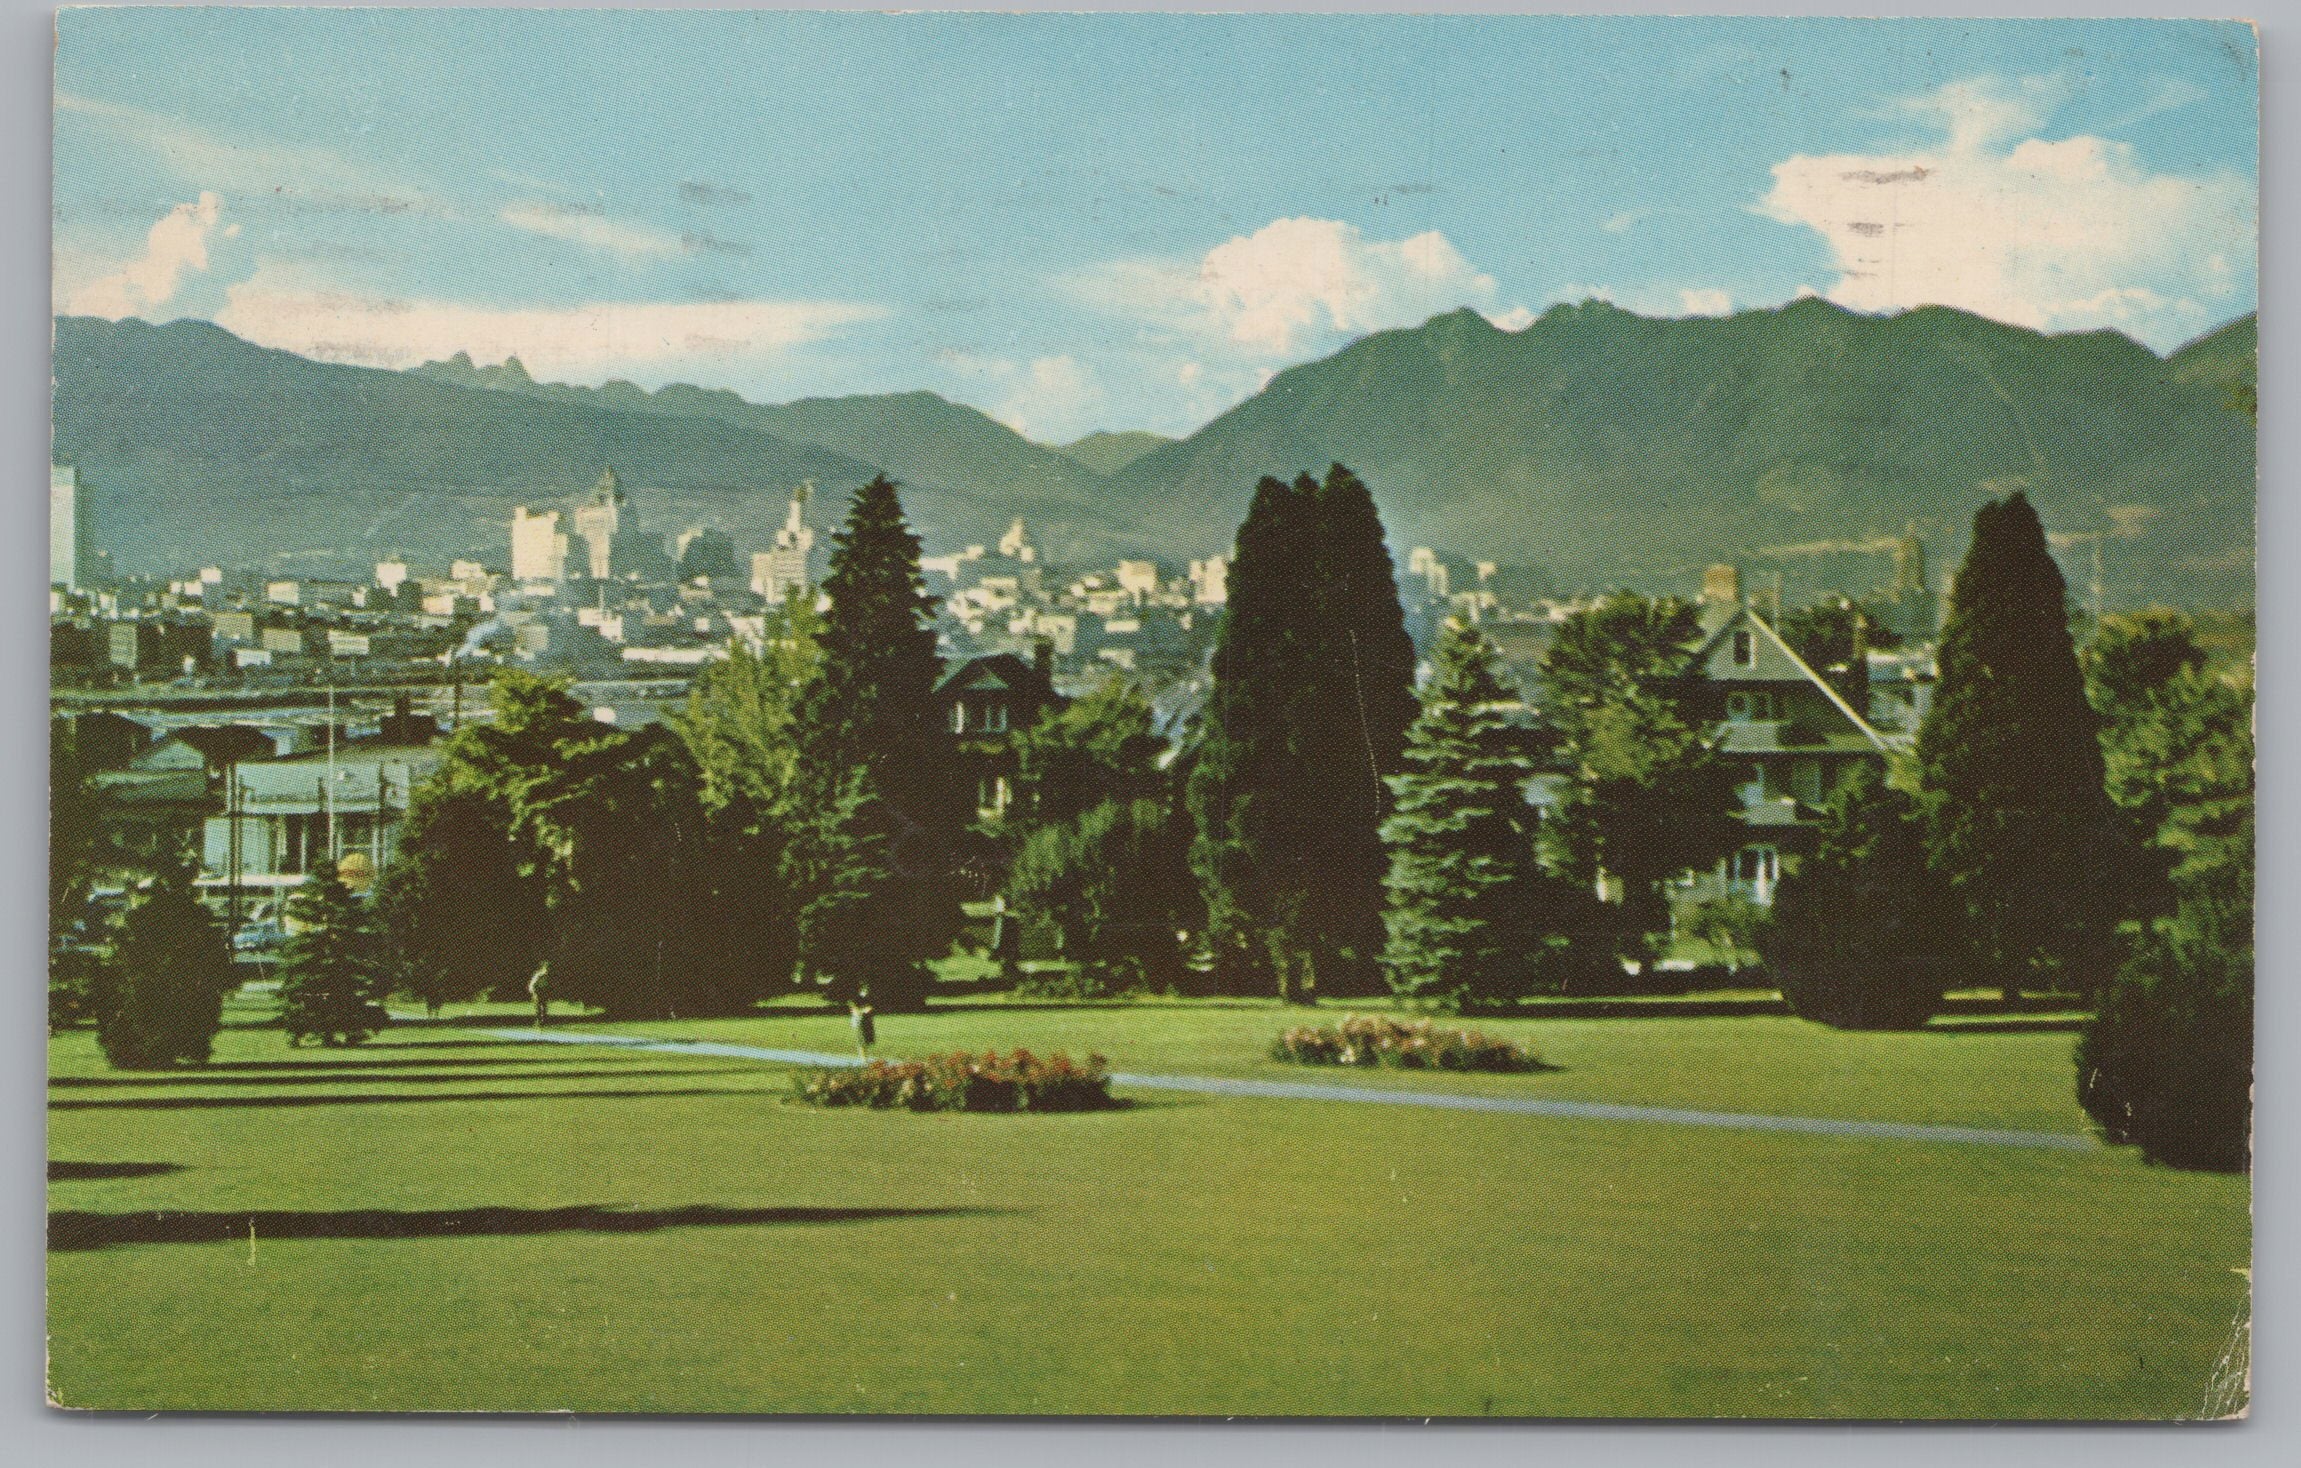 Formally Known As Little Mountain Park, Vintage Post Card.